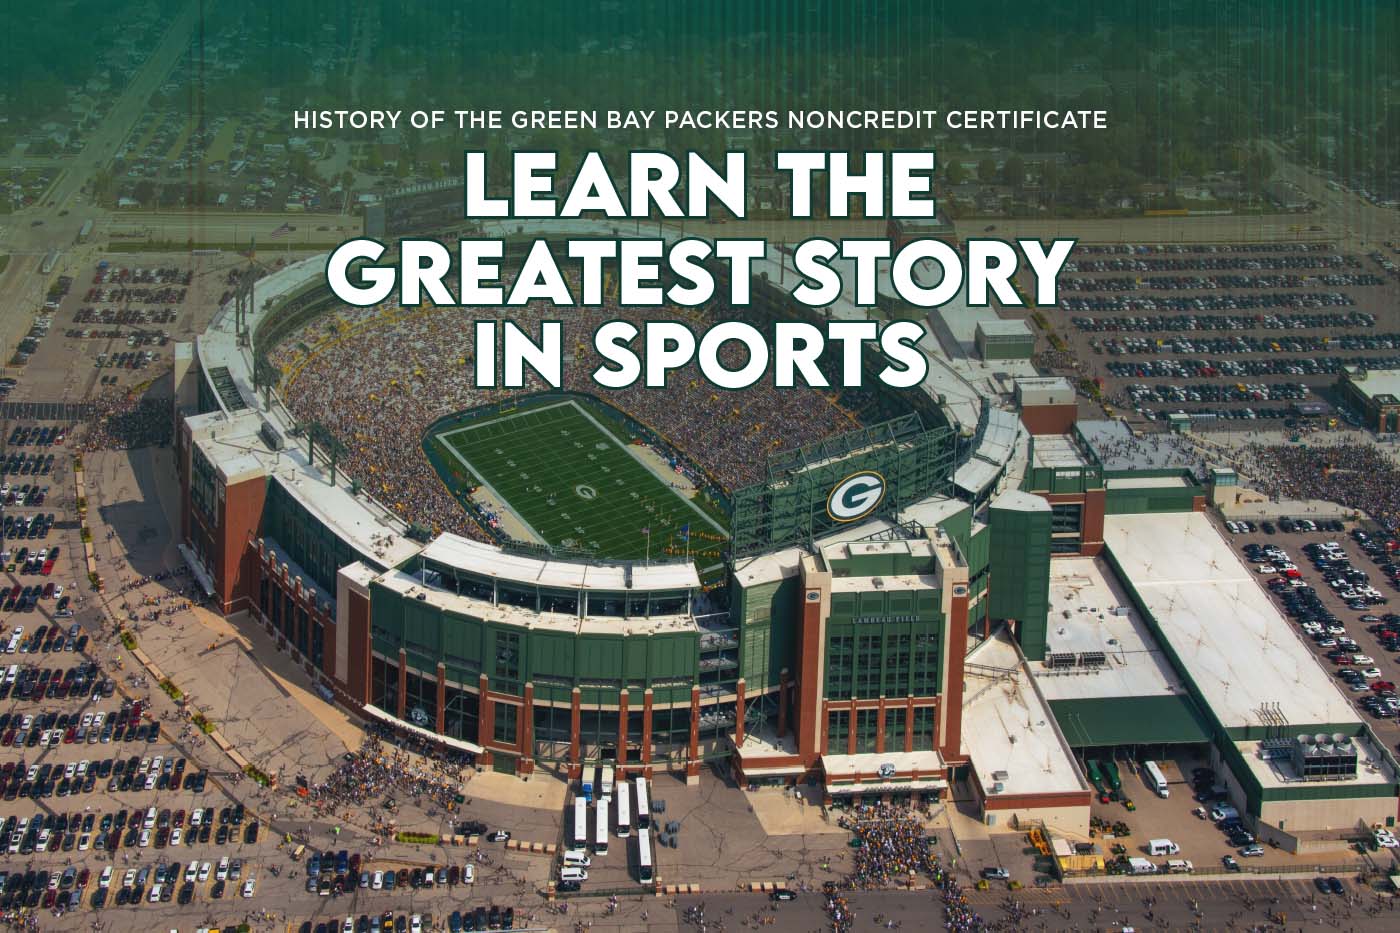 Packers Hall of Fame, Packers Pro Shop open